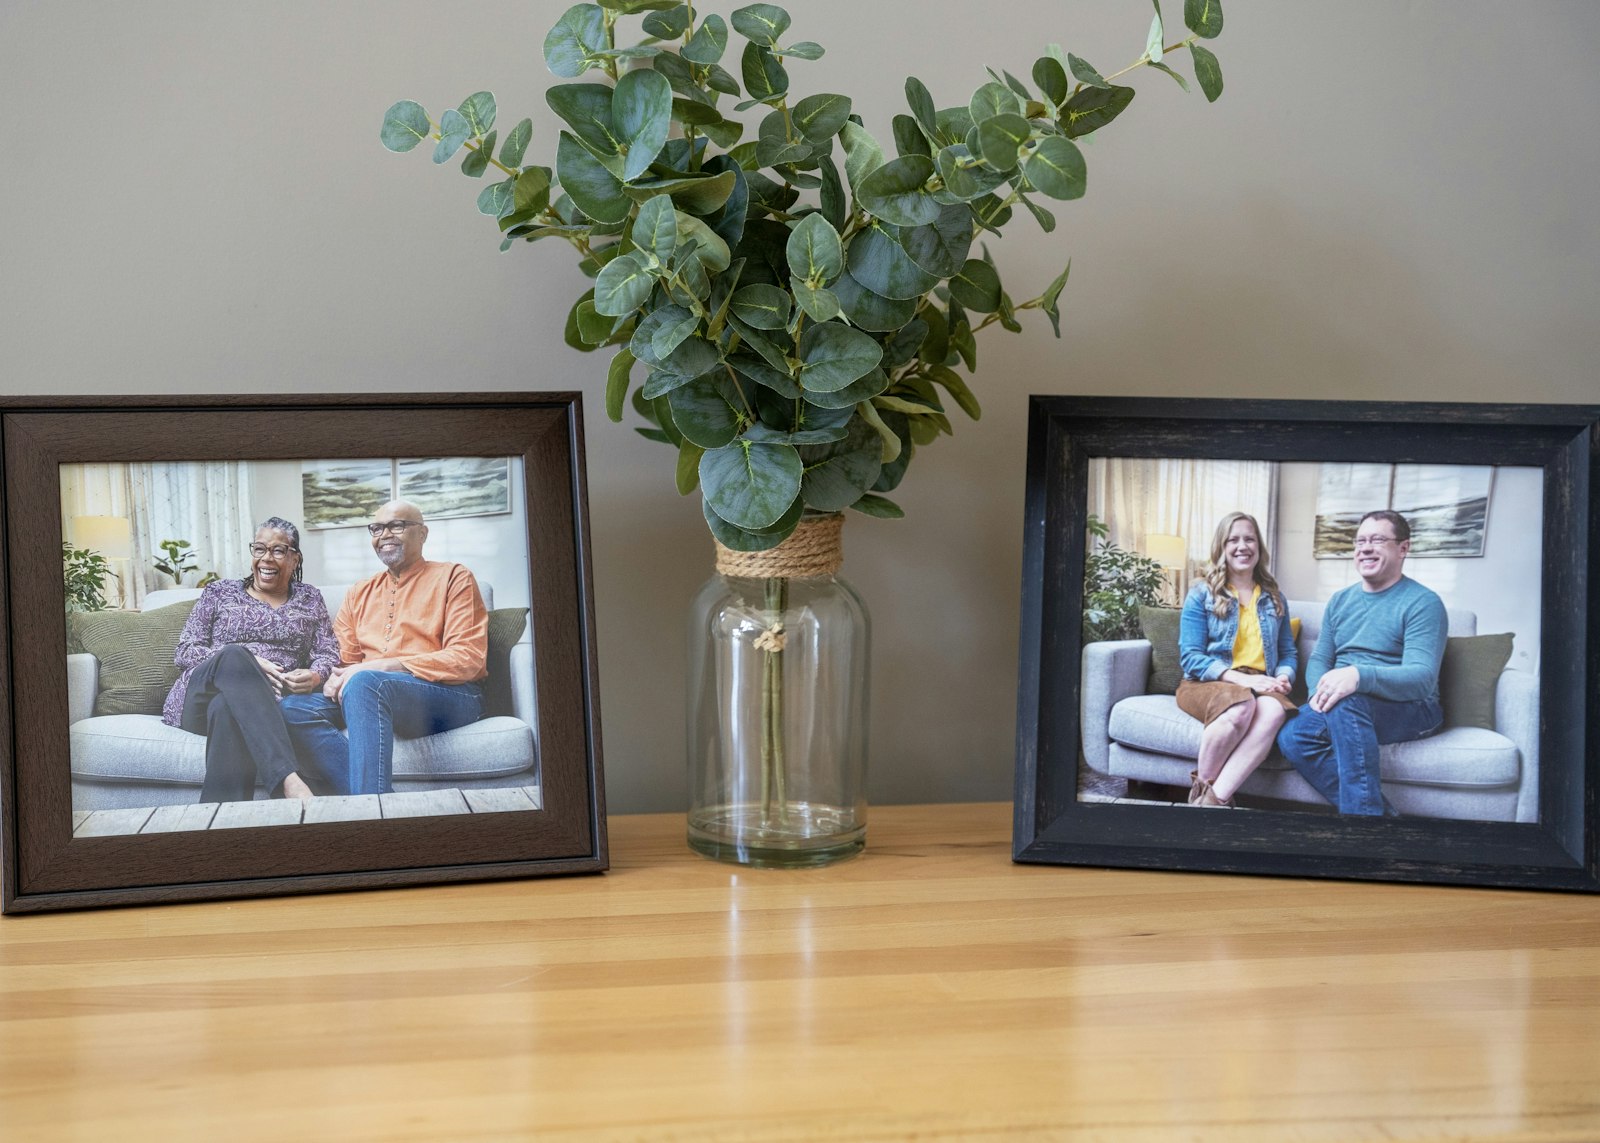 Photos in The Marriage's Group's Port Huron offices show couples who have taken part in the online video courses, which offer couples preparing for marriage a convenient resource for pre-Cana and NFP materials, which can be accessed at a couple's own pace.